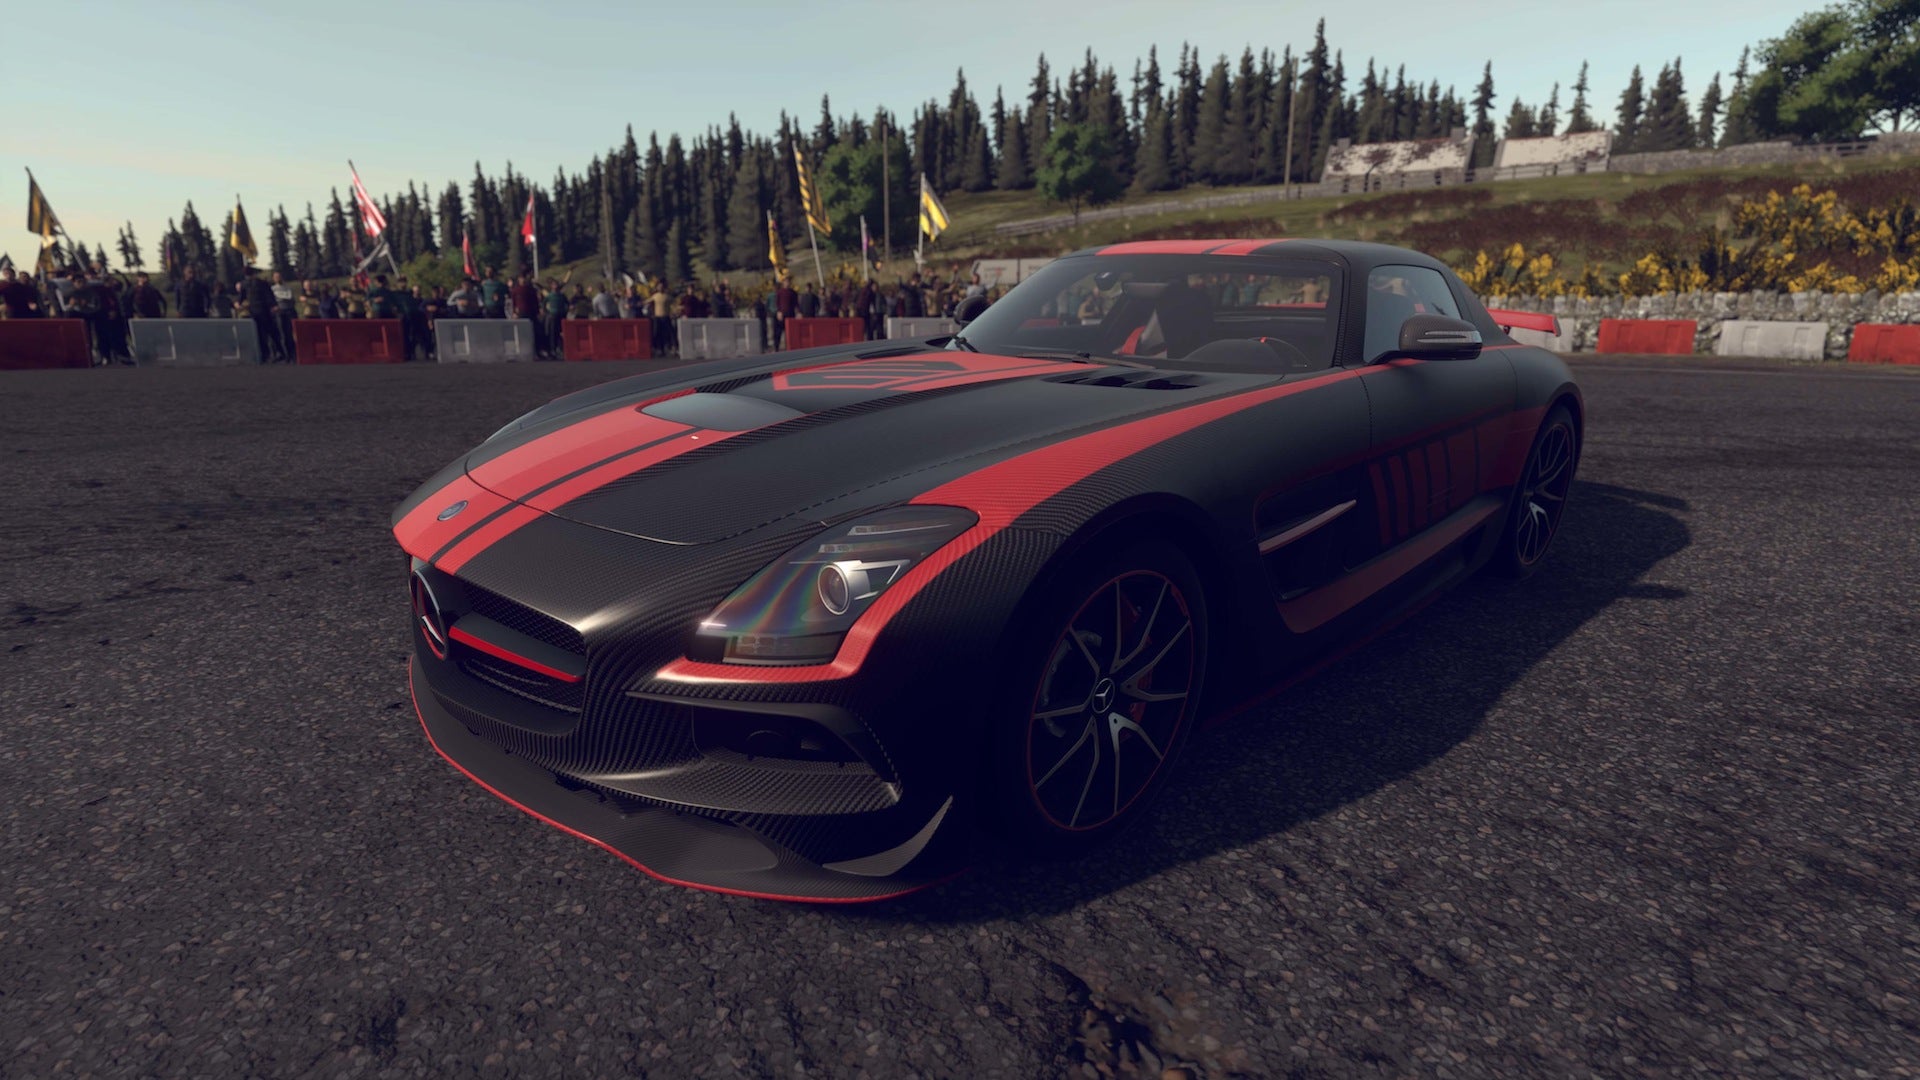 Image for Driveclub: October launch confirmed, new trailer released